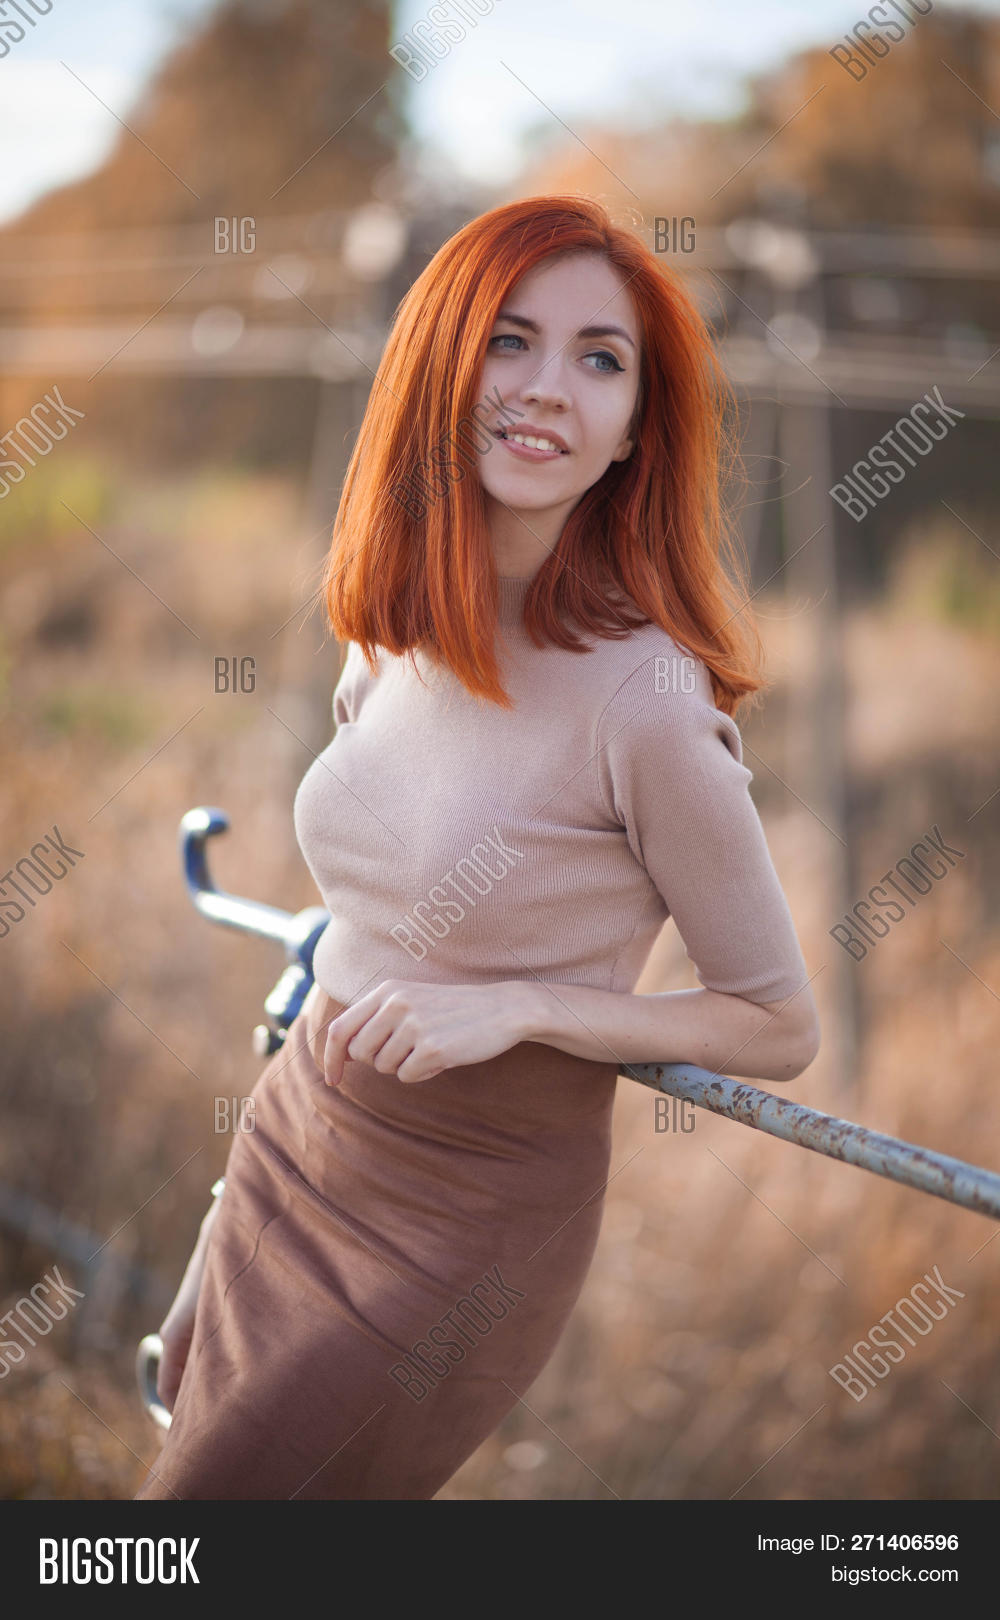 antony cunningham recommends cute redhead pics pic